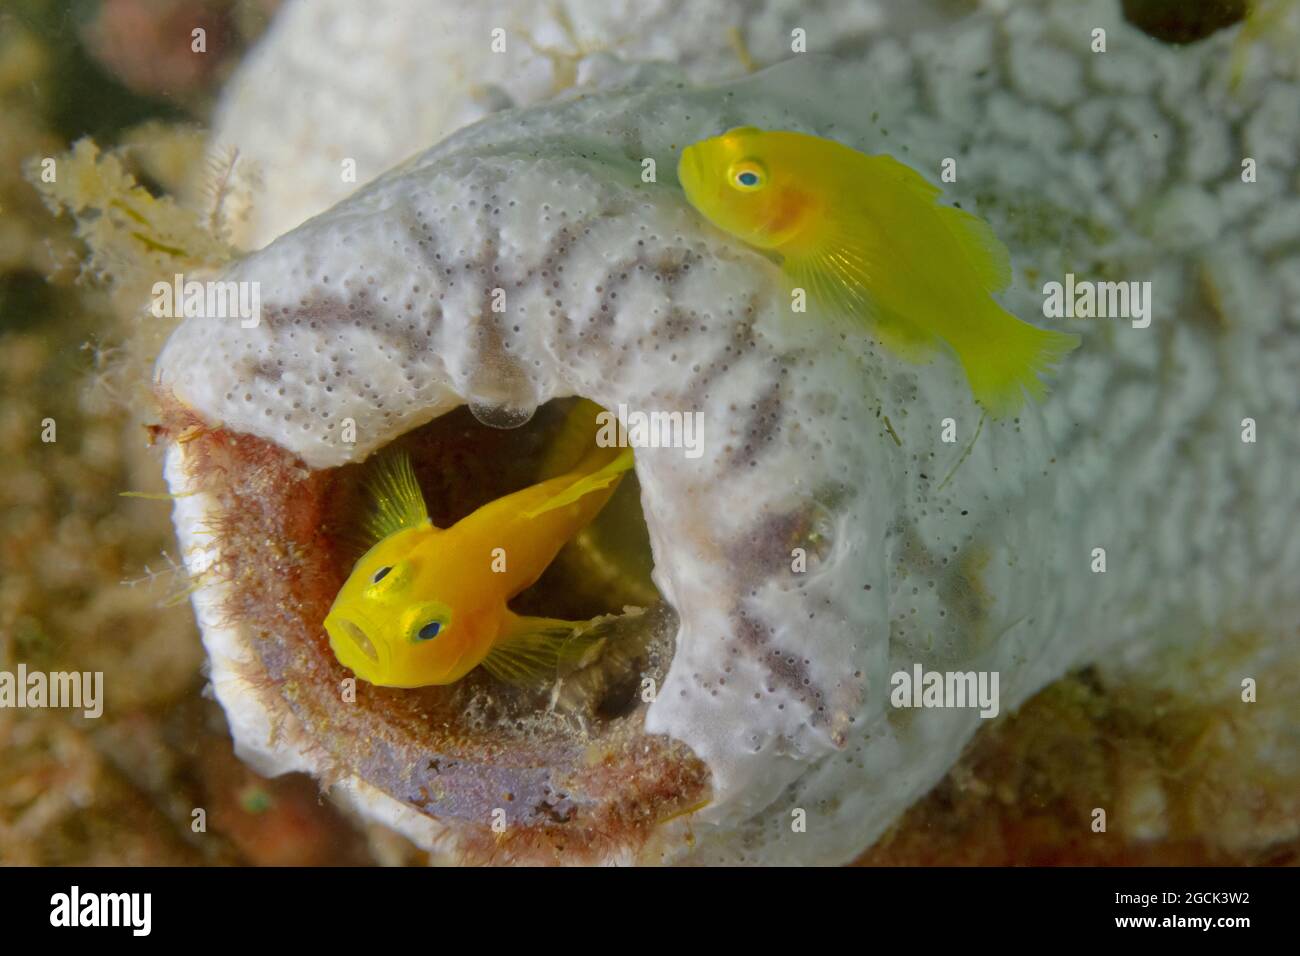 Closeup of tiny bright yellow Gobiodon okinawae or Okinawa goby fishes swimimng near coral reef undersea Stock Photo